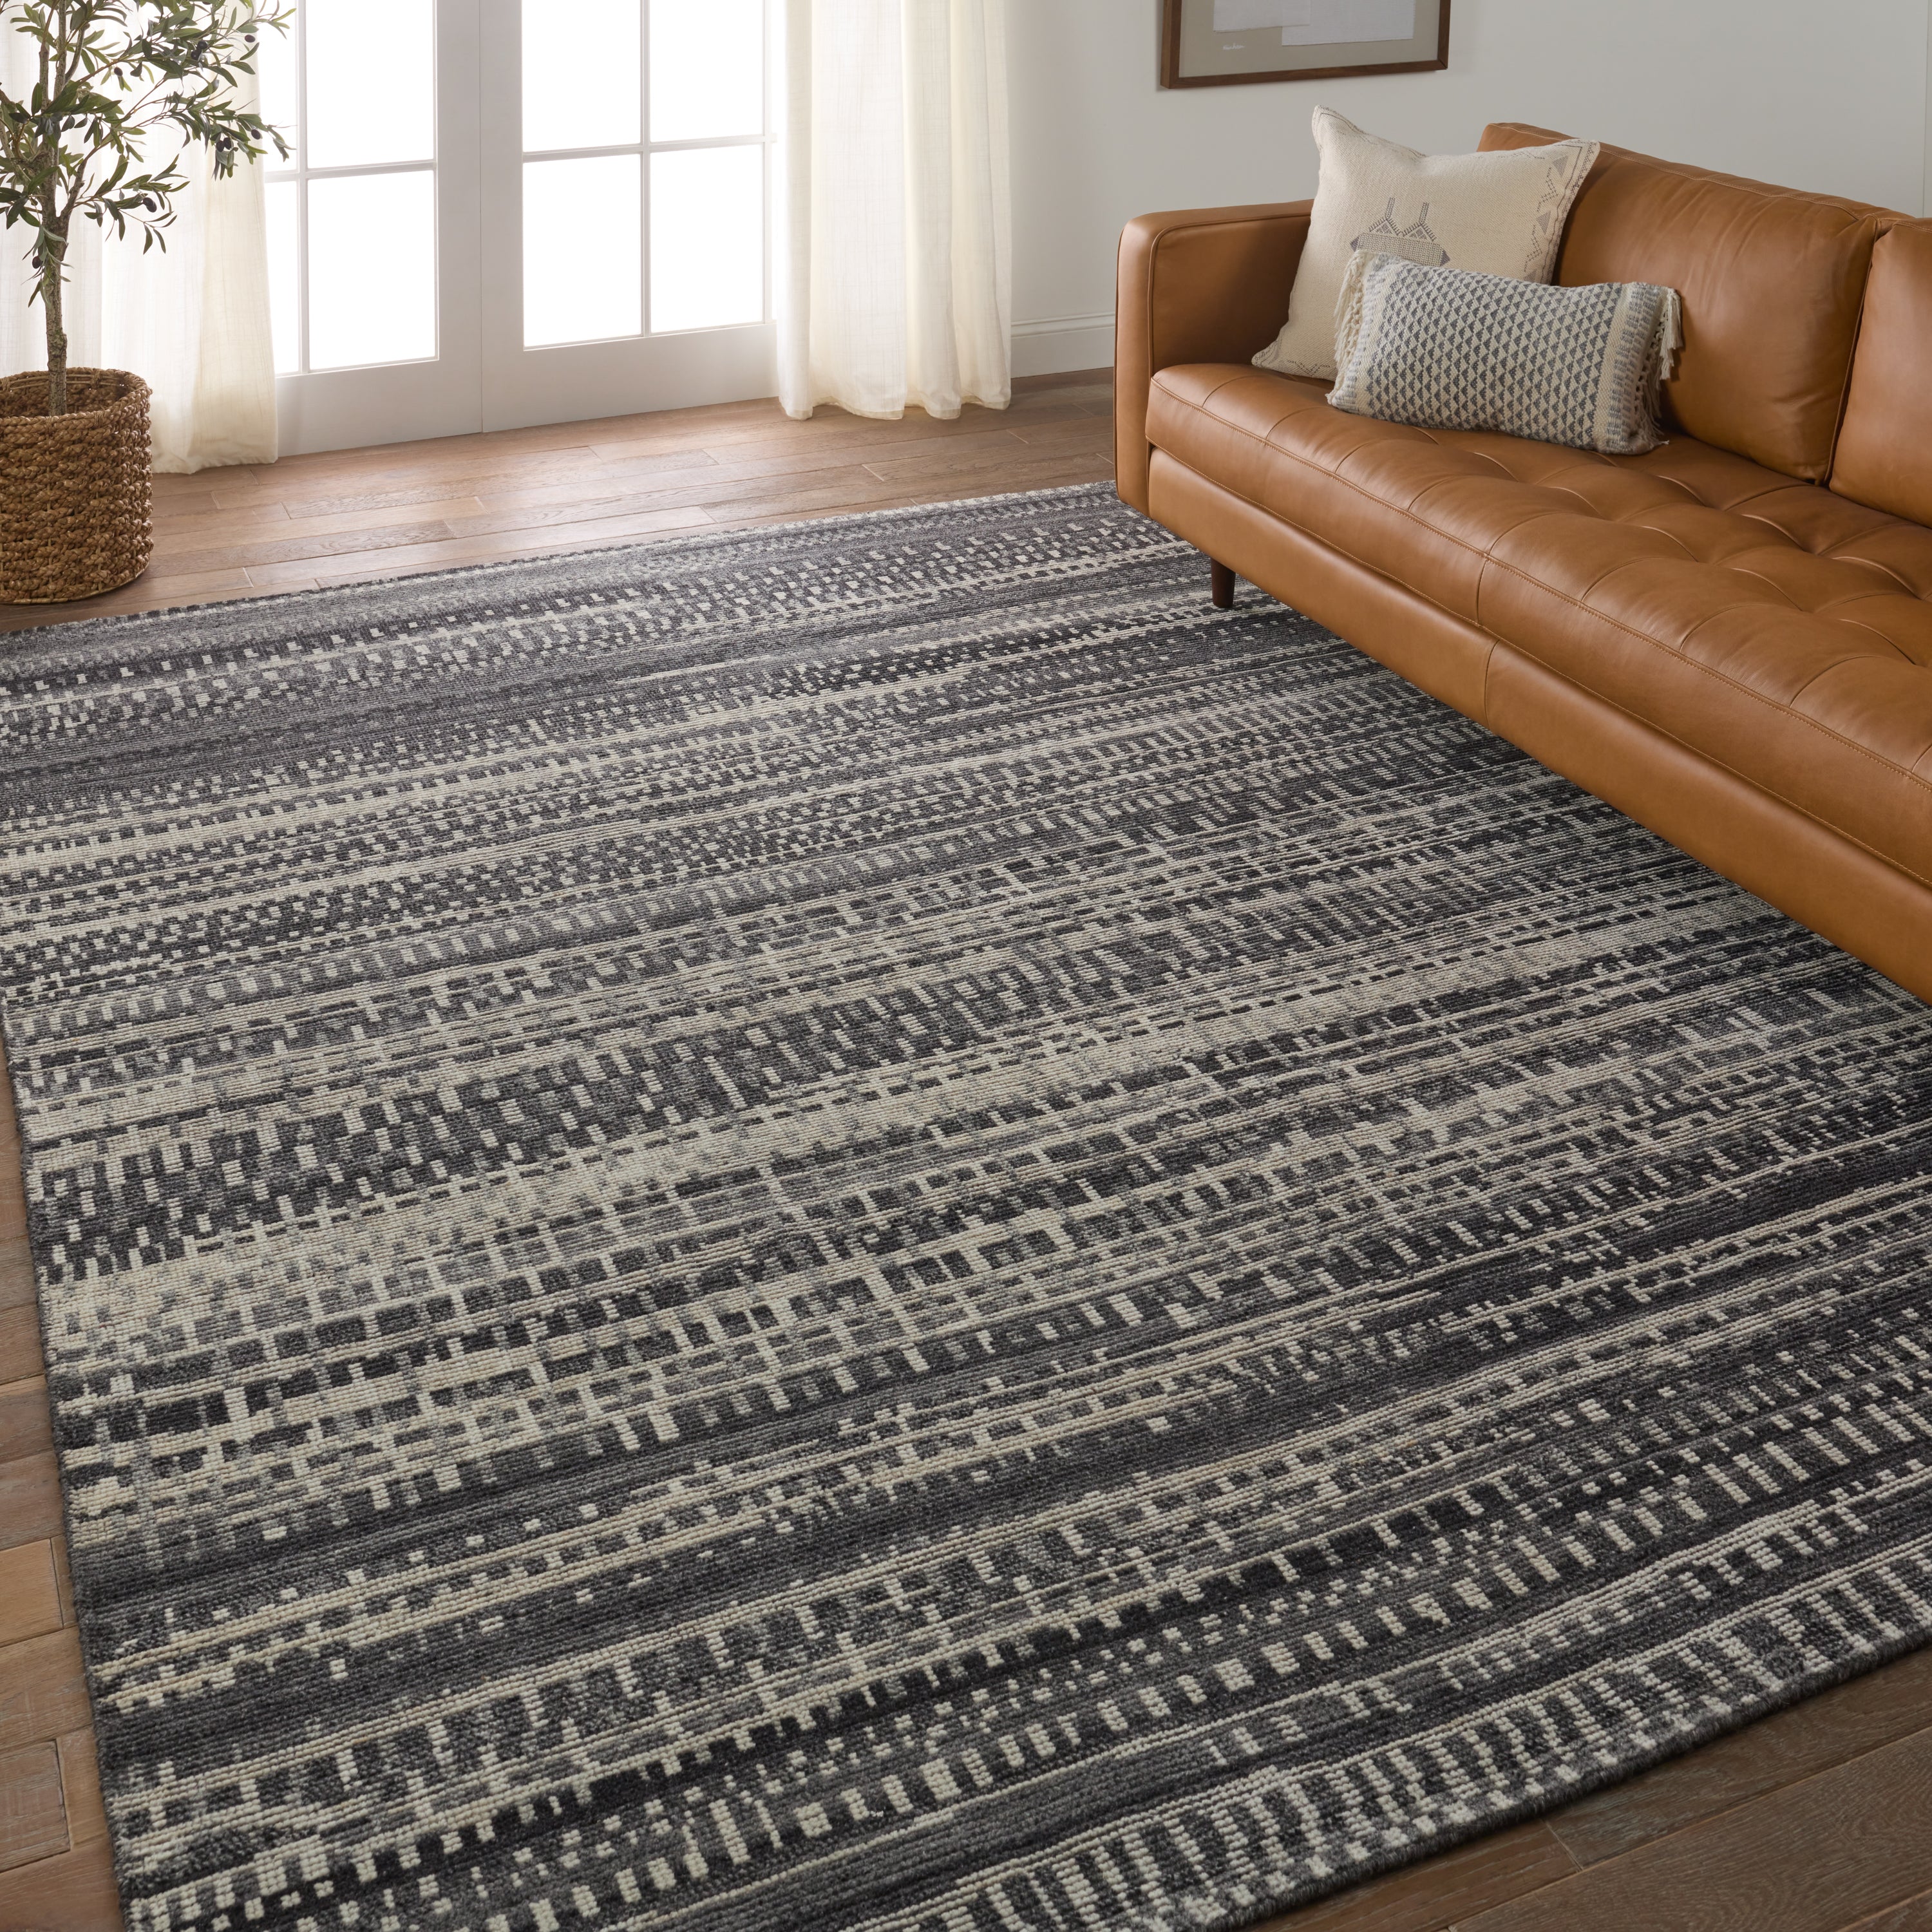 The Rize collection offers intricate and delicately designed global patterns to the modern home. The luxurious Jamaal area rug showcases a striped, linear motif in a classic gray, cream, and black colorway. This accent's hand-knotted wool construction ensures timeless durability and a stunning presence in bohemian spaces.  Amethyst Home provides interior design, new construction, custom furniture, and area rugs in the Laguna Beach metro area.